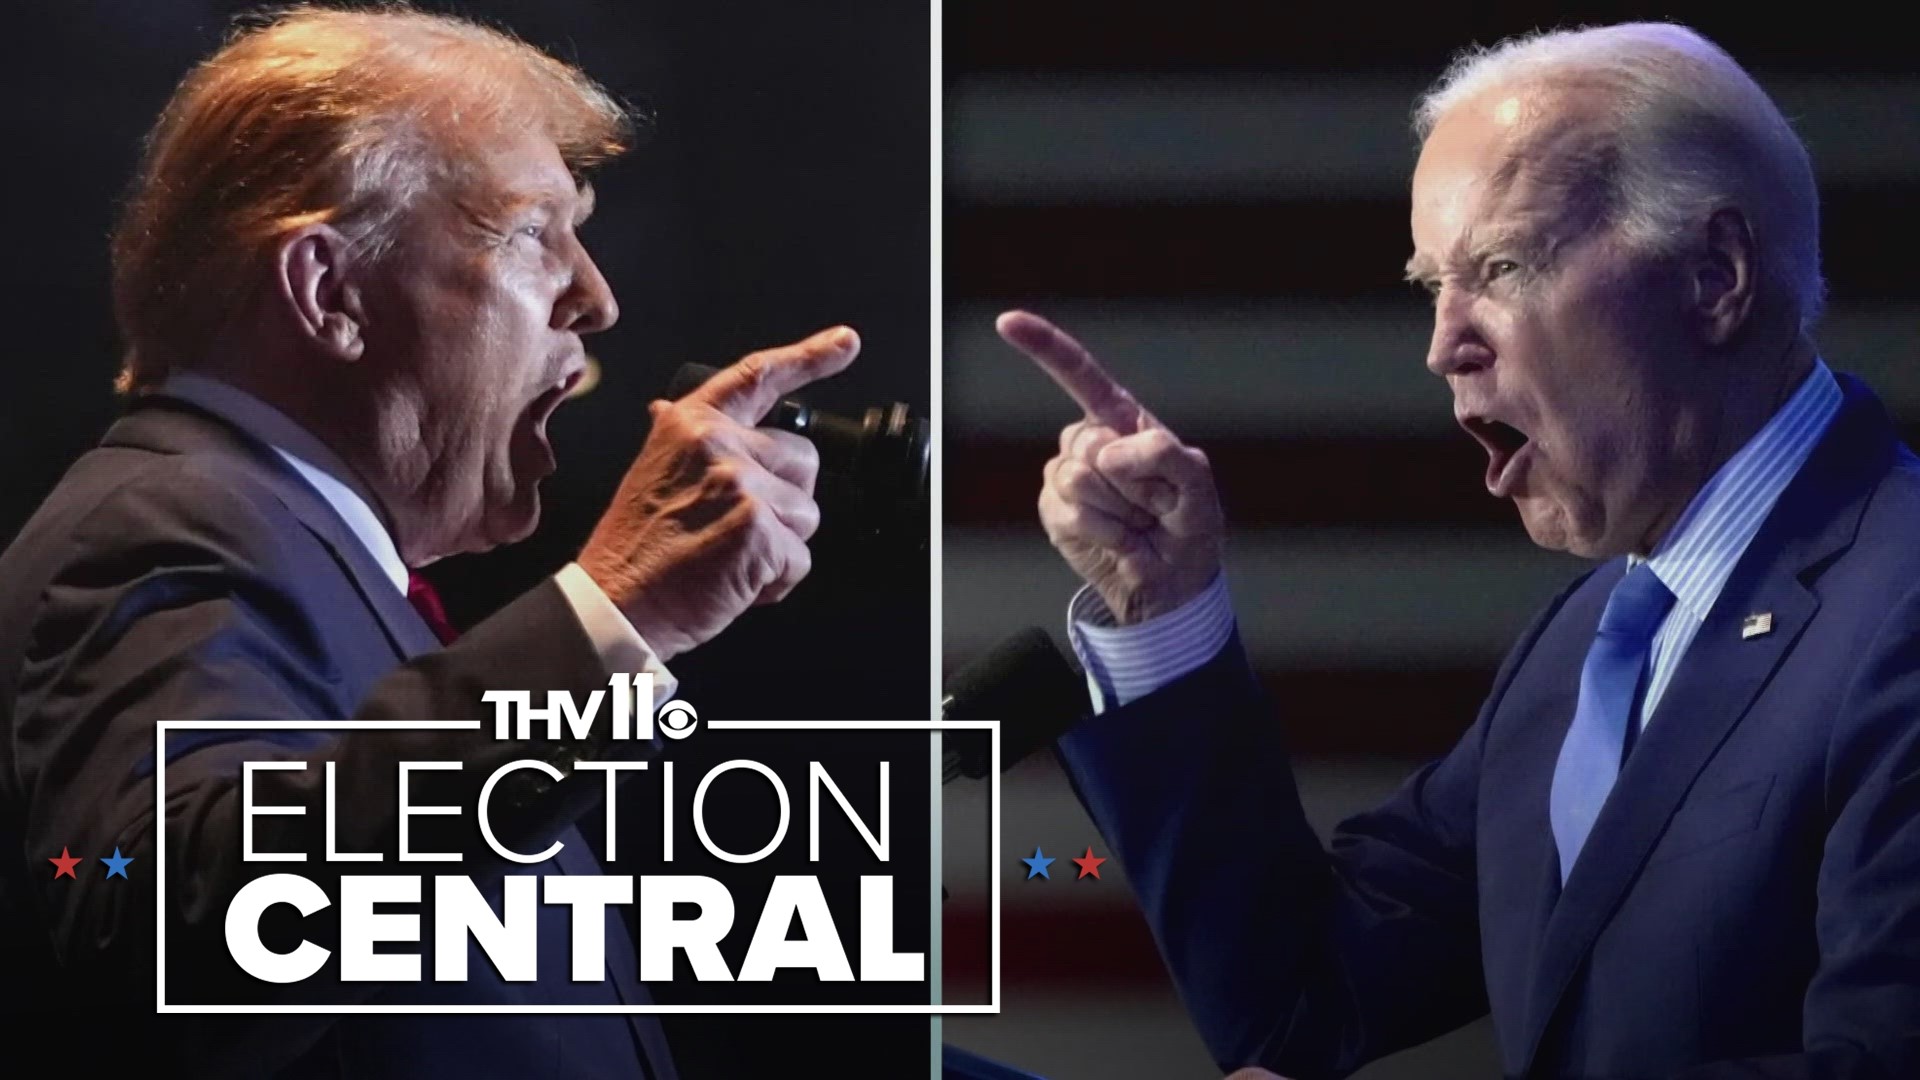 President Joe Biden and former President Donald Trump clinched their parties' presidential nominations Tuesday with decisive victories in a slate of primaries.